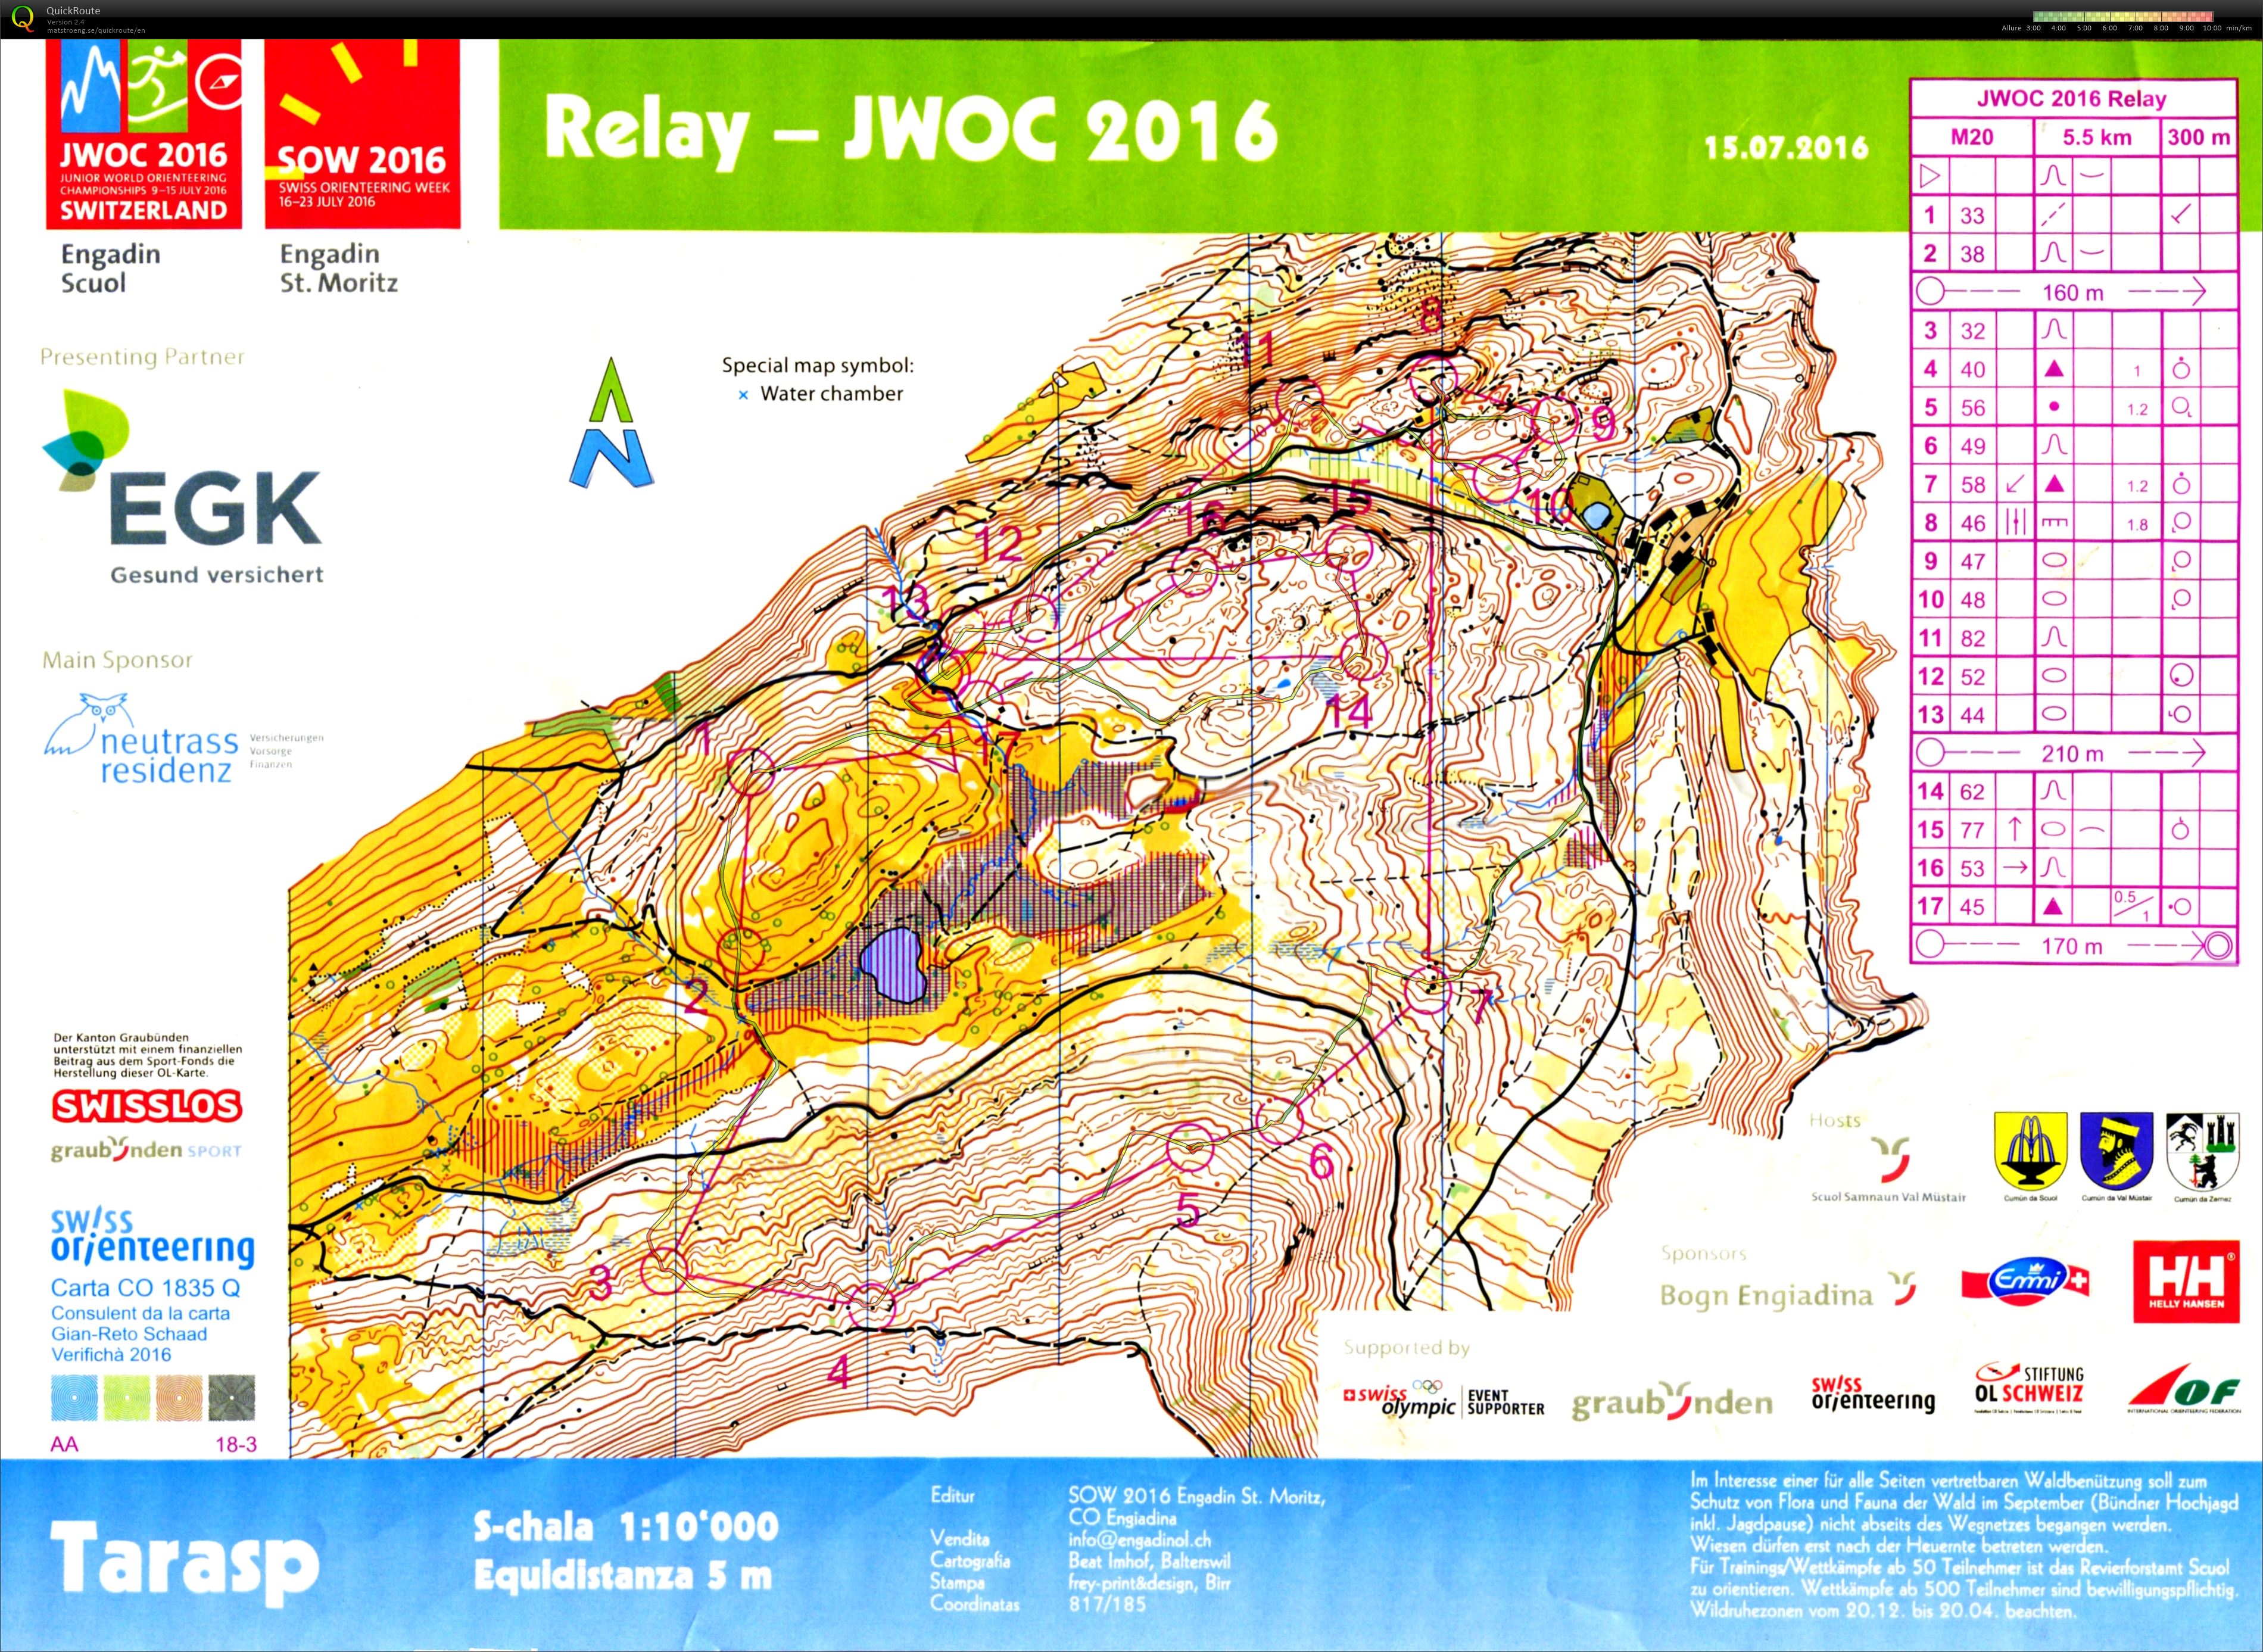 JWOC Relay for training (2016-07-15)